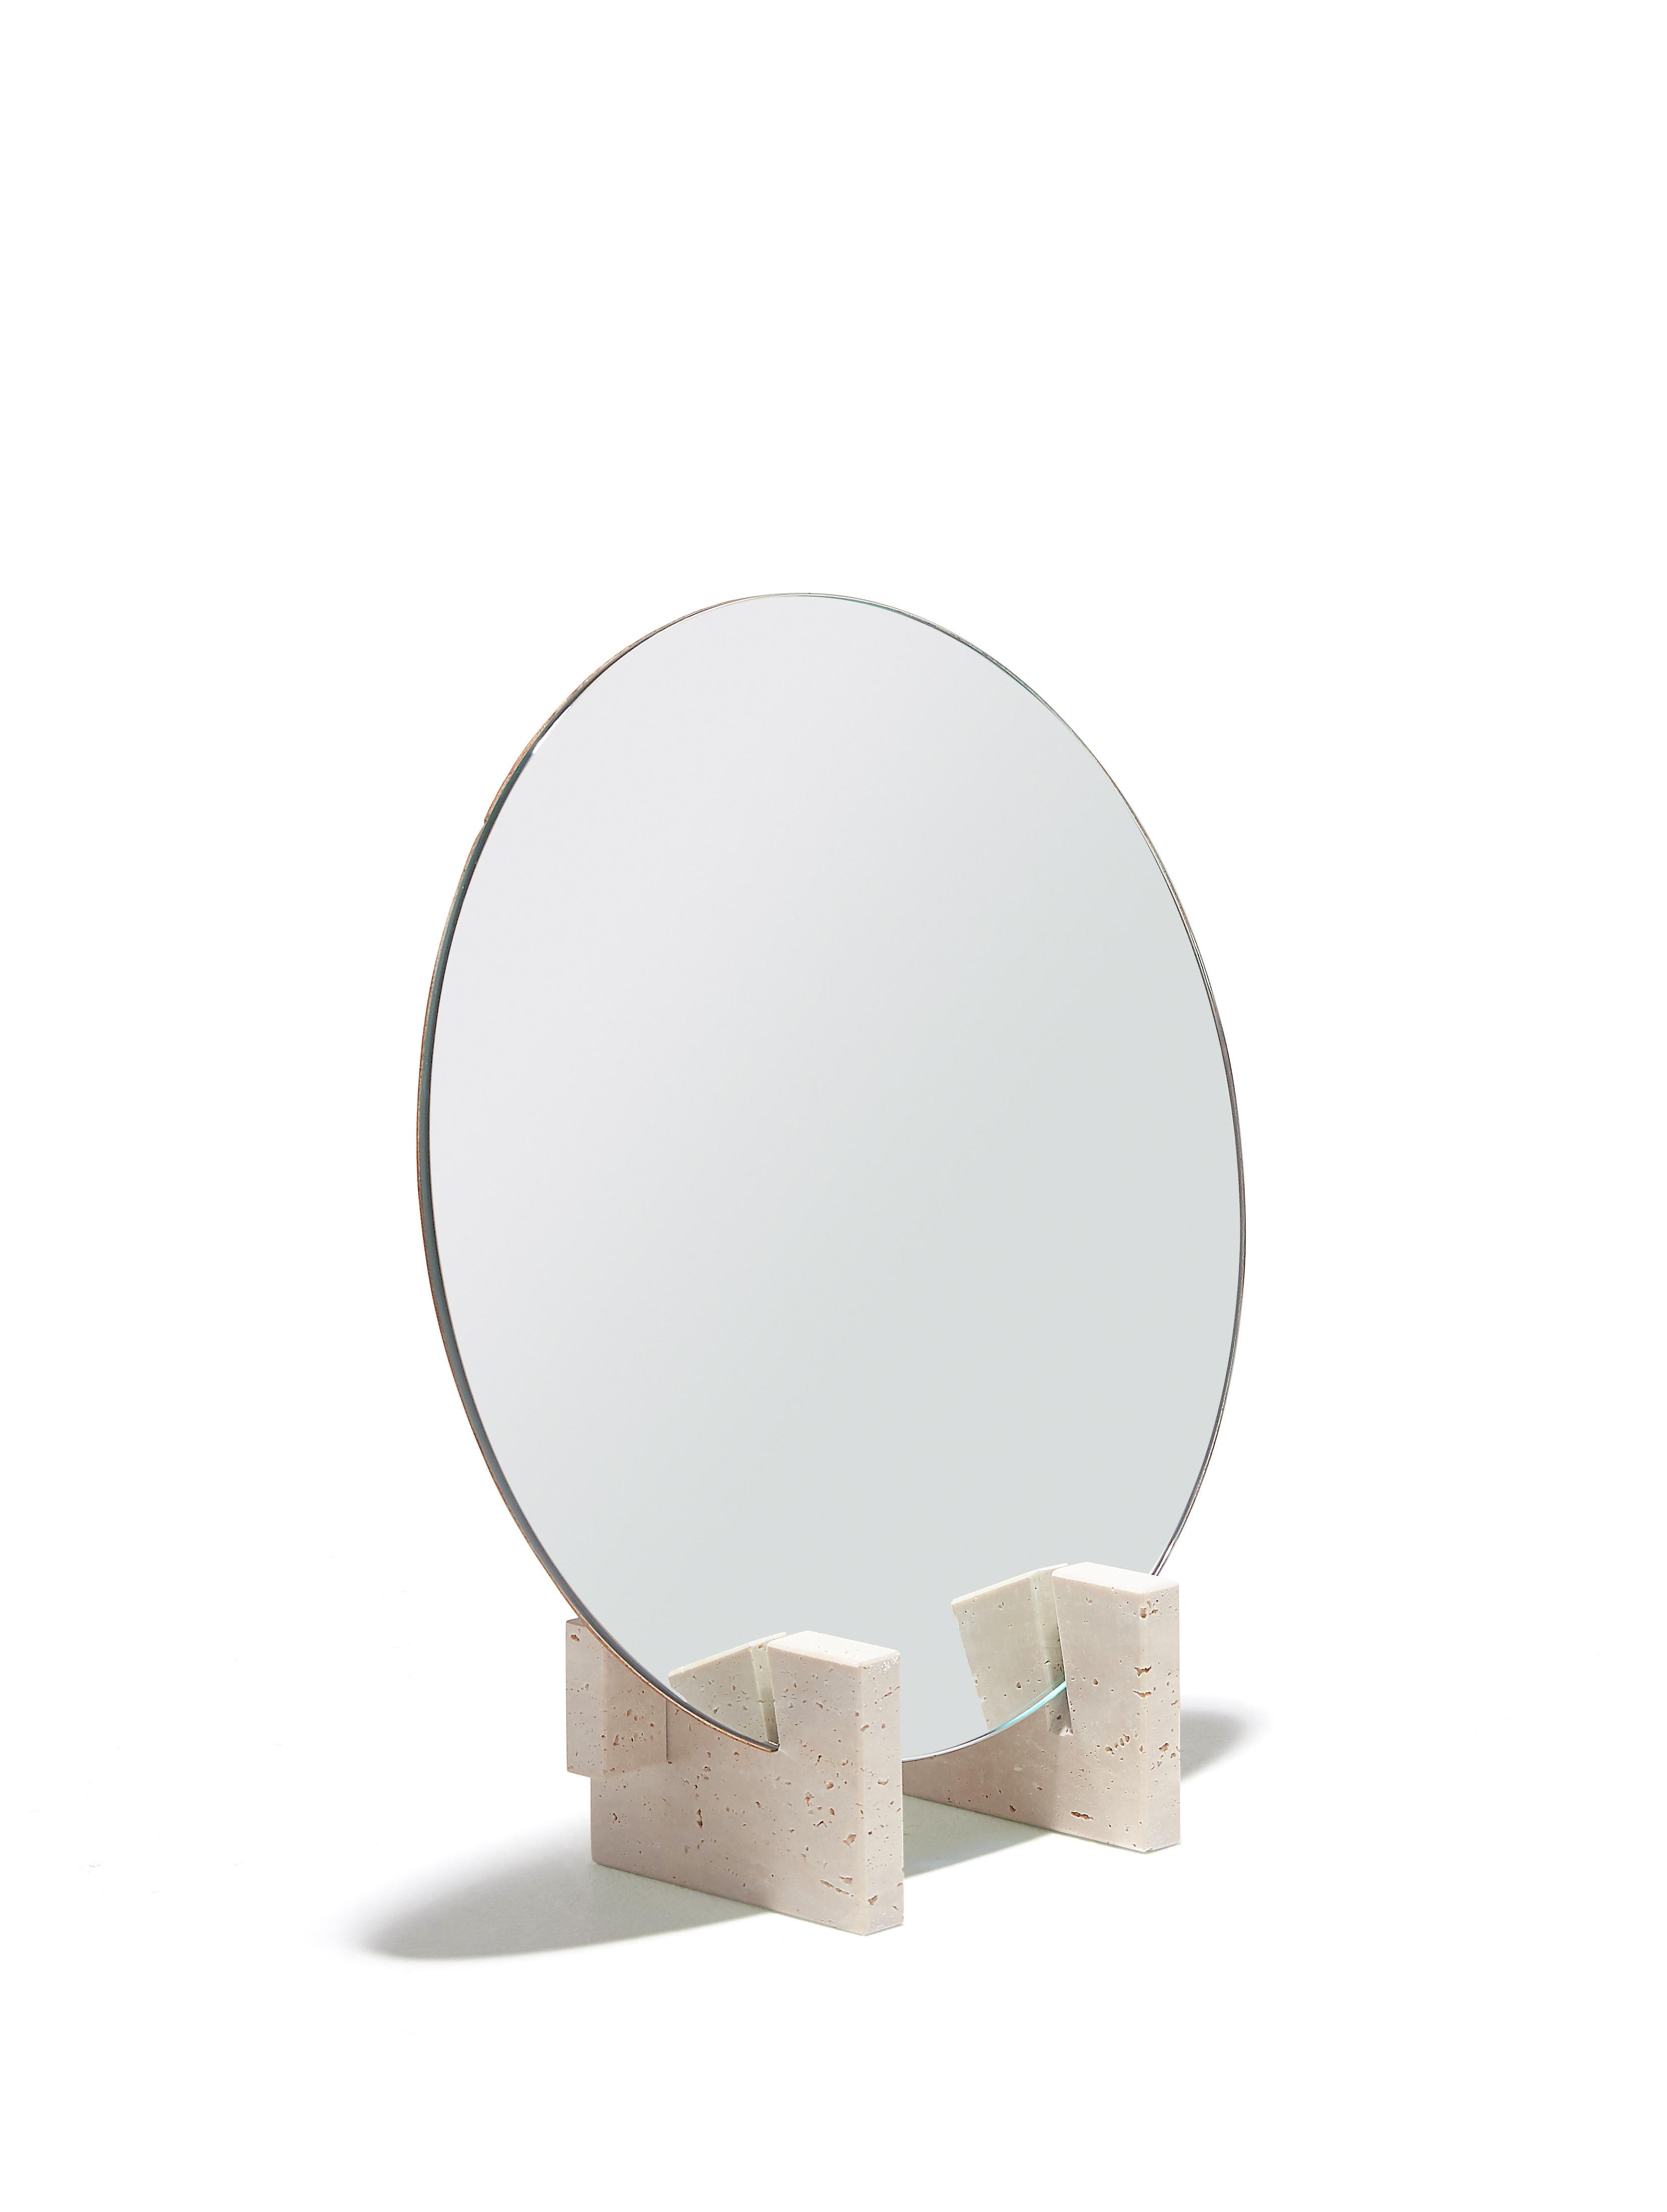 Spanish “Fit Mirror” Travertine Marble and Rusty Iron Minimalist Mirror by Aparentment For Sale